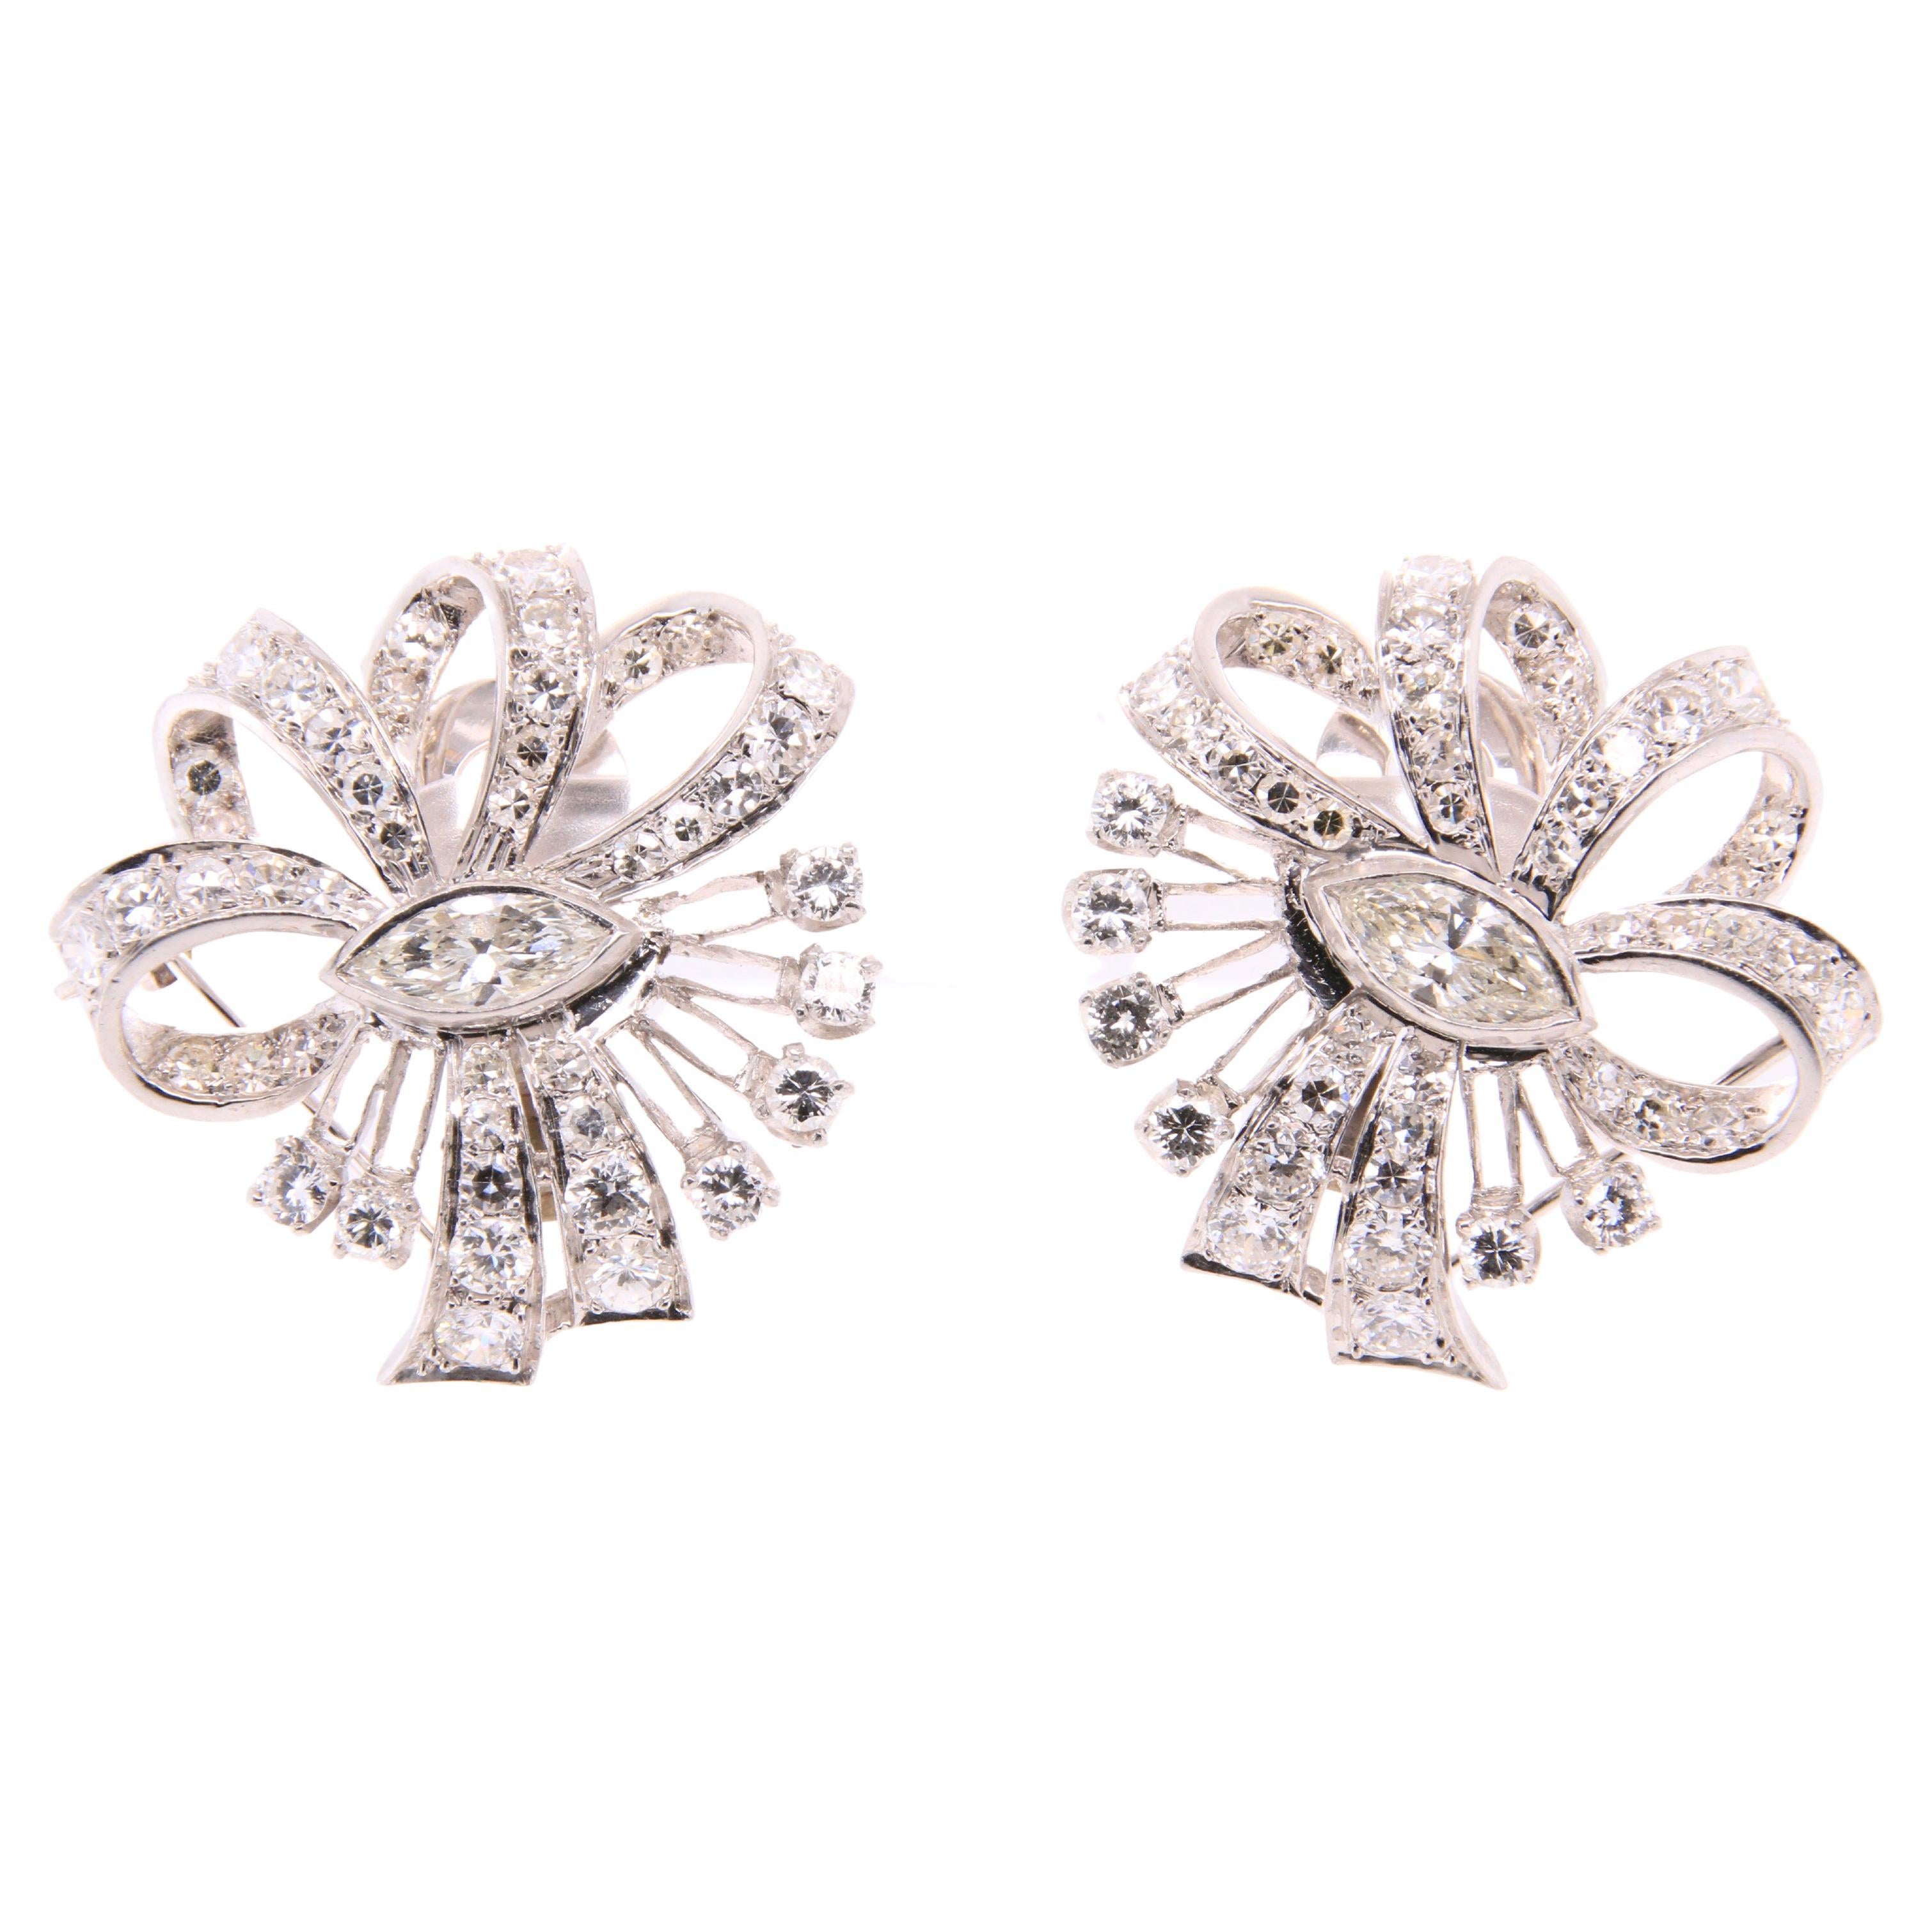 Edwardian, Cluster, Diamond Clip-On Earrings with Pin-Backs